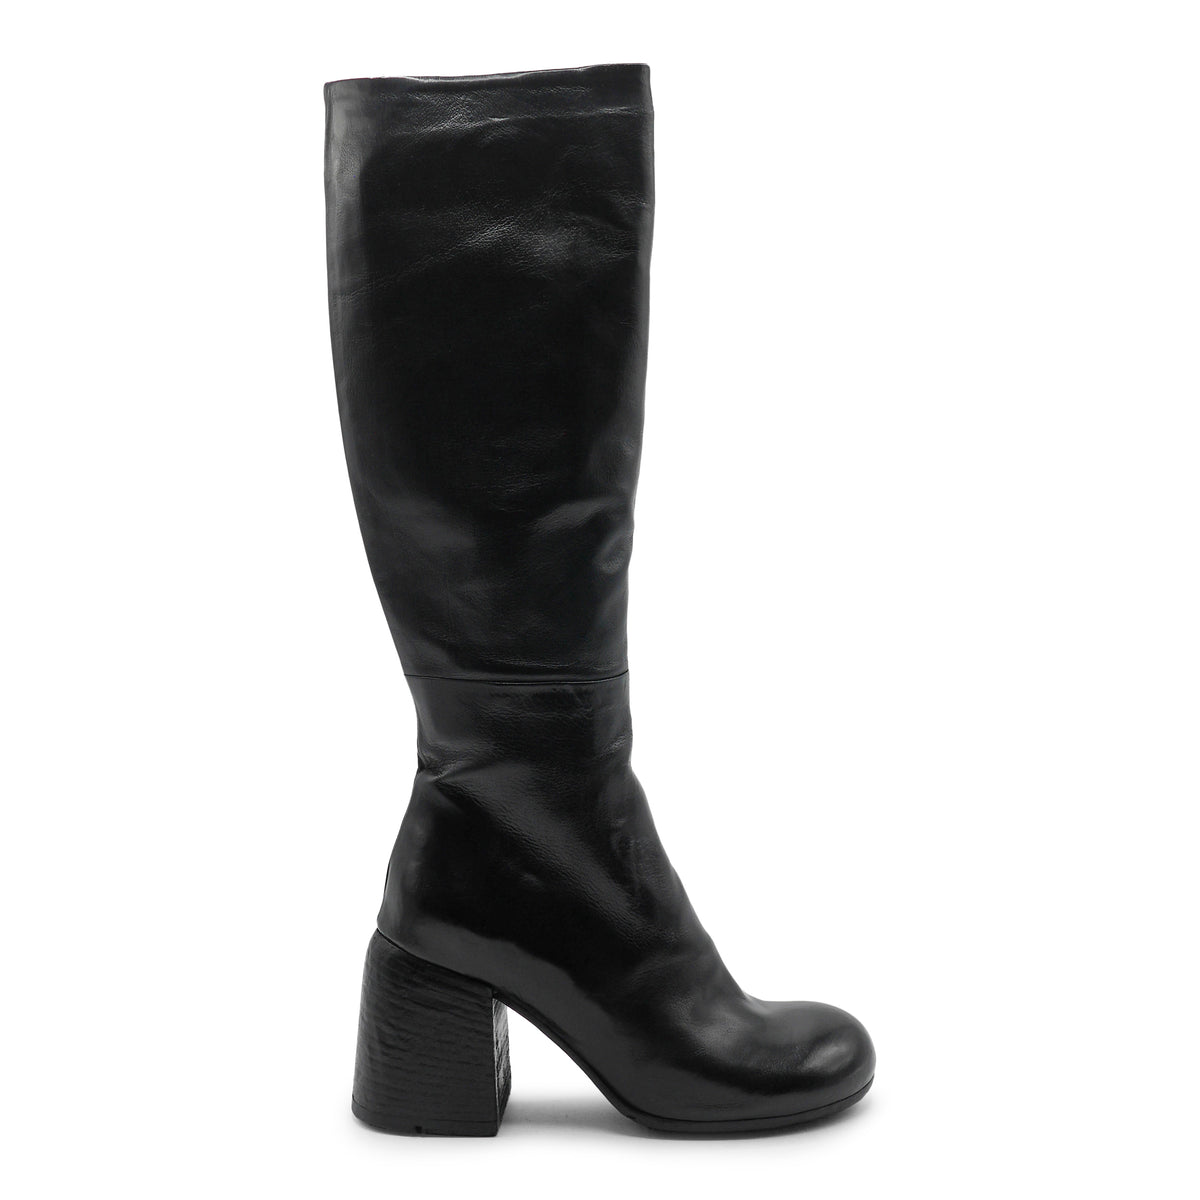 FPOIA - Black Knee High Leather Boot